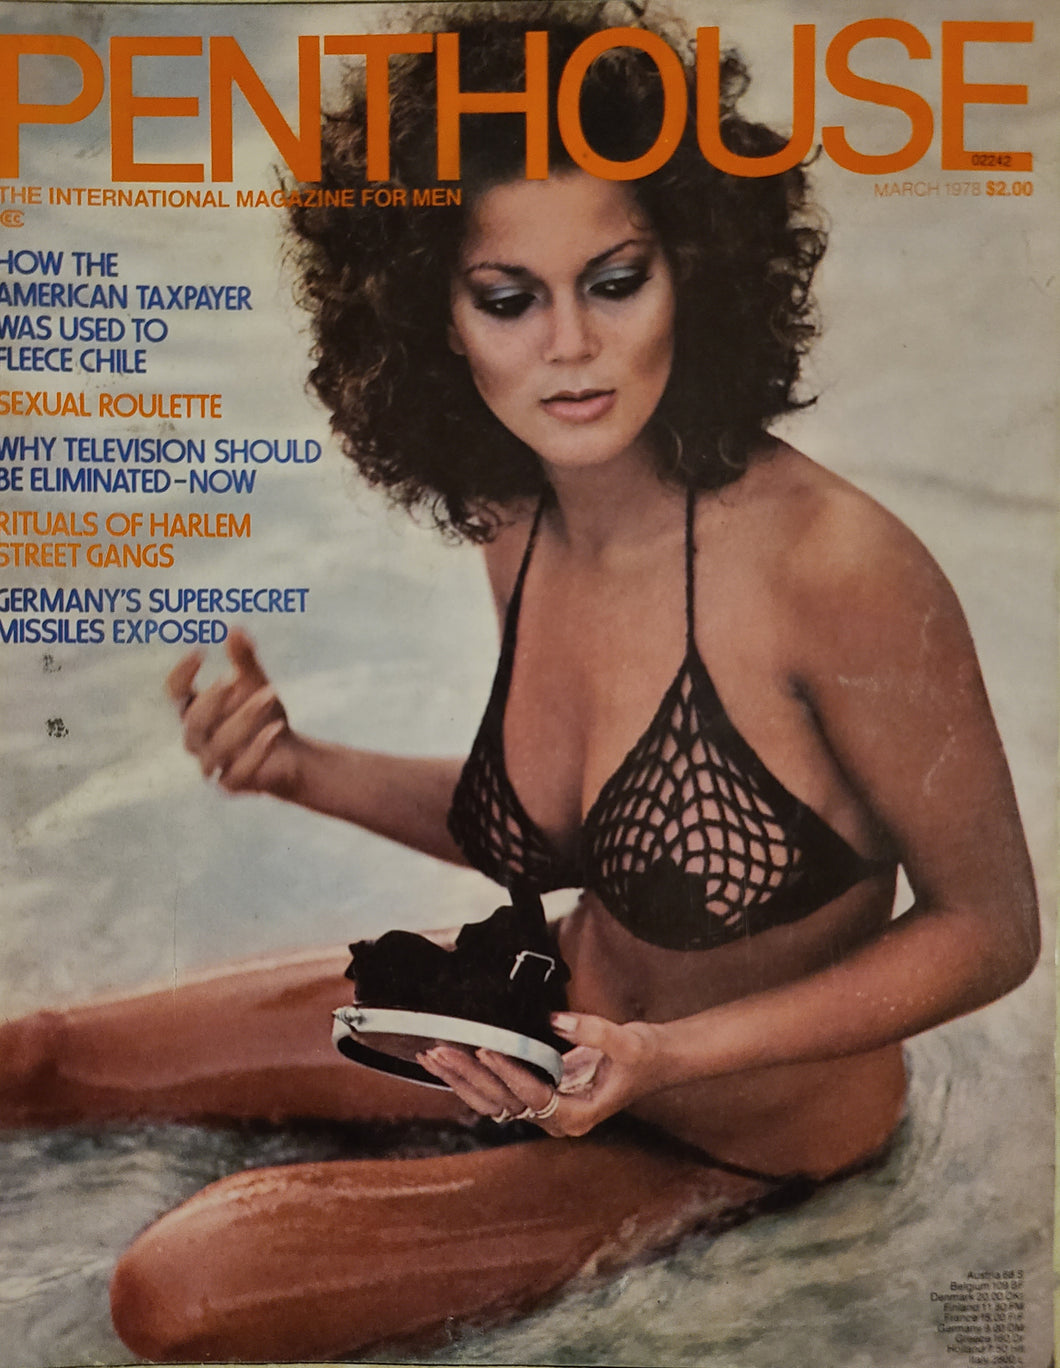 Penthouse - March 1978